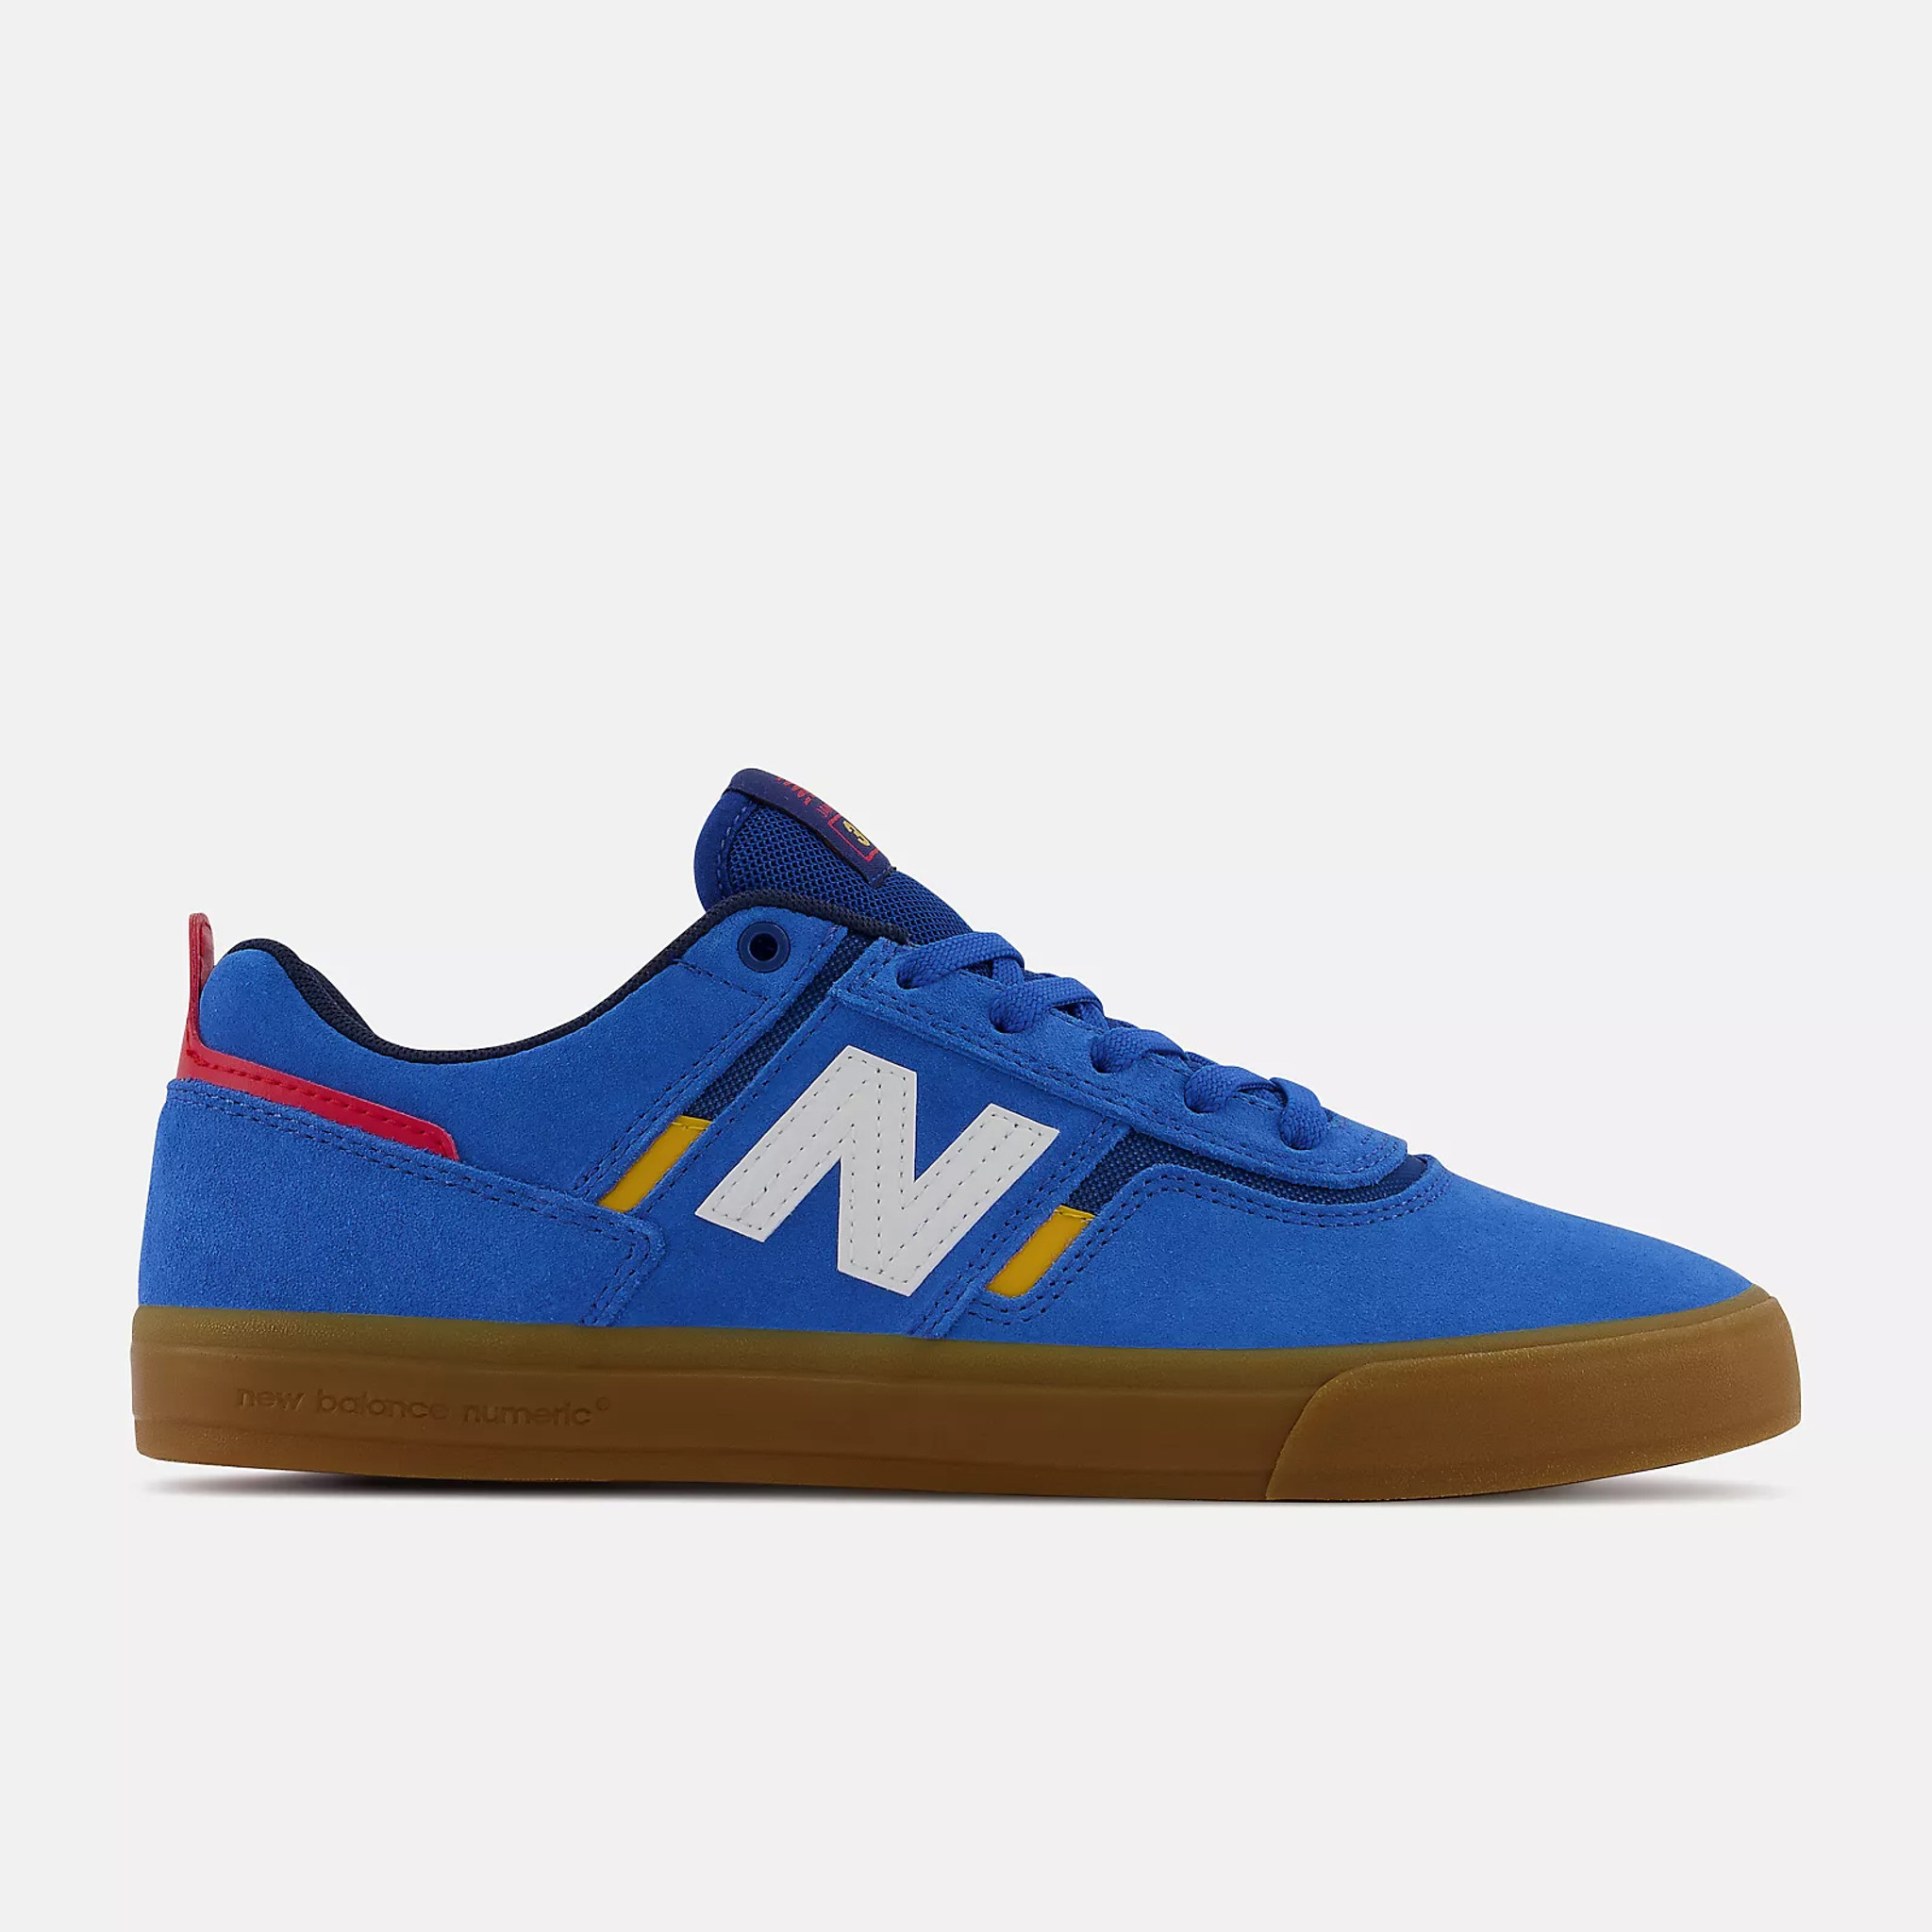 New Balance Numeric Jamie Foy 306 Blue with Yellow NM306SLC Skate Shoes ...